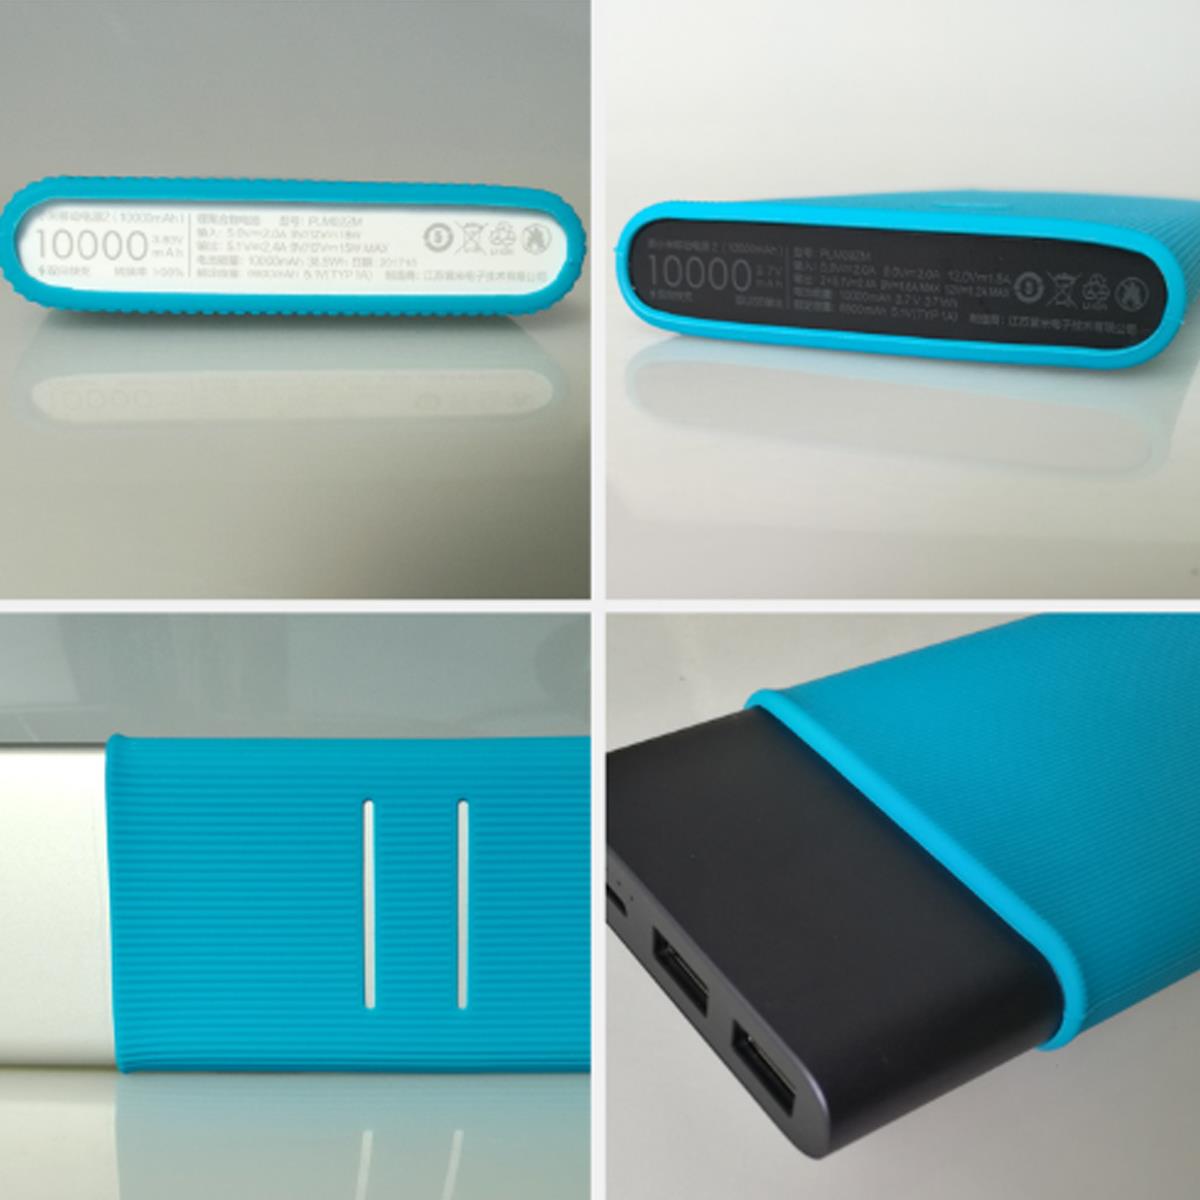 Xiaomi-2-Generation-10000-mAh-charger-Power-Bank-Treasure-Silicone-Protective-Cover-1265003